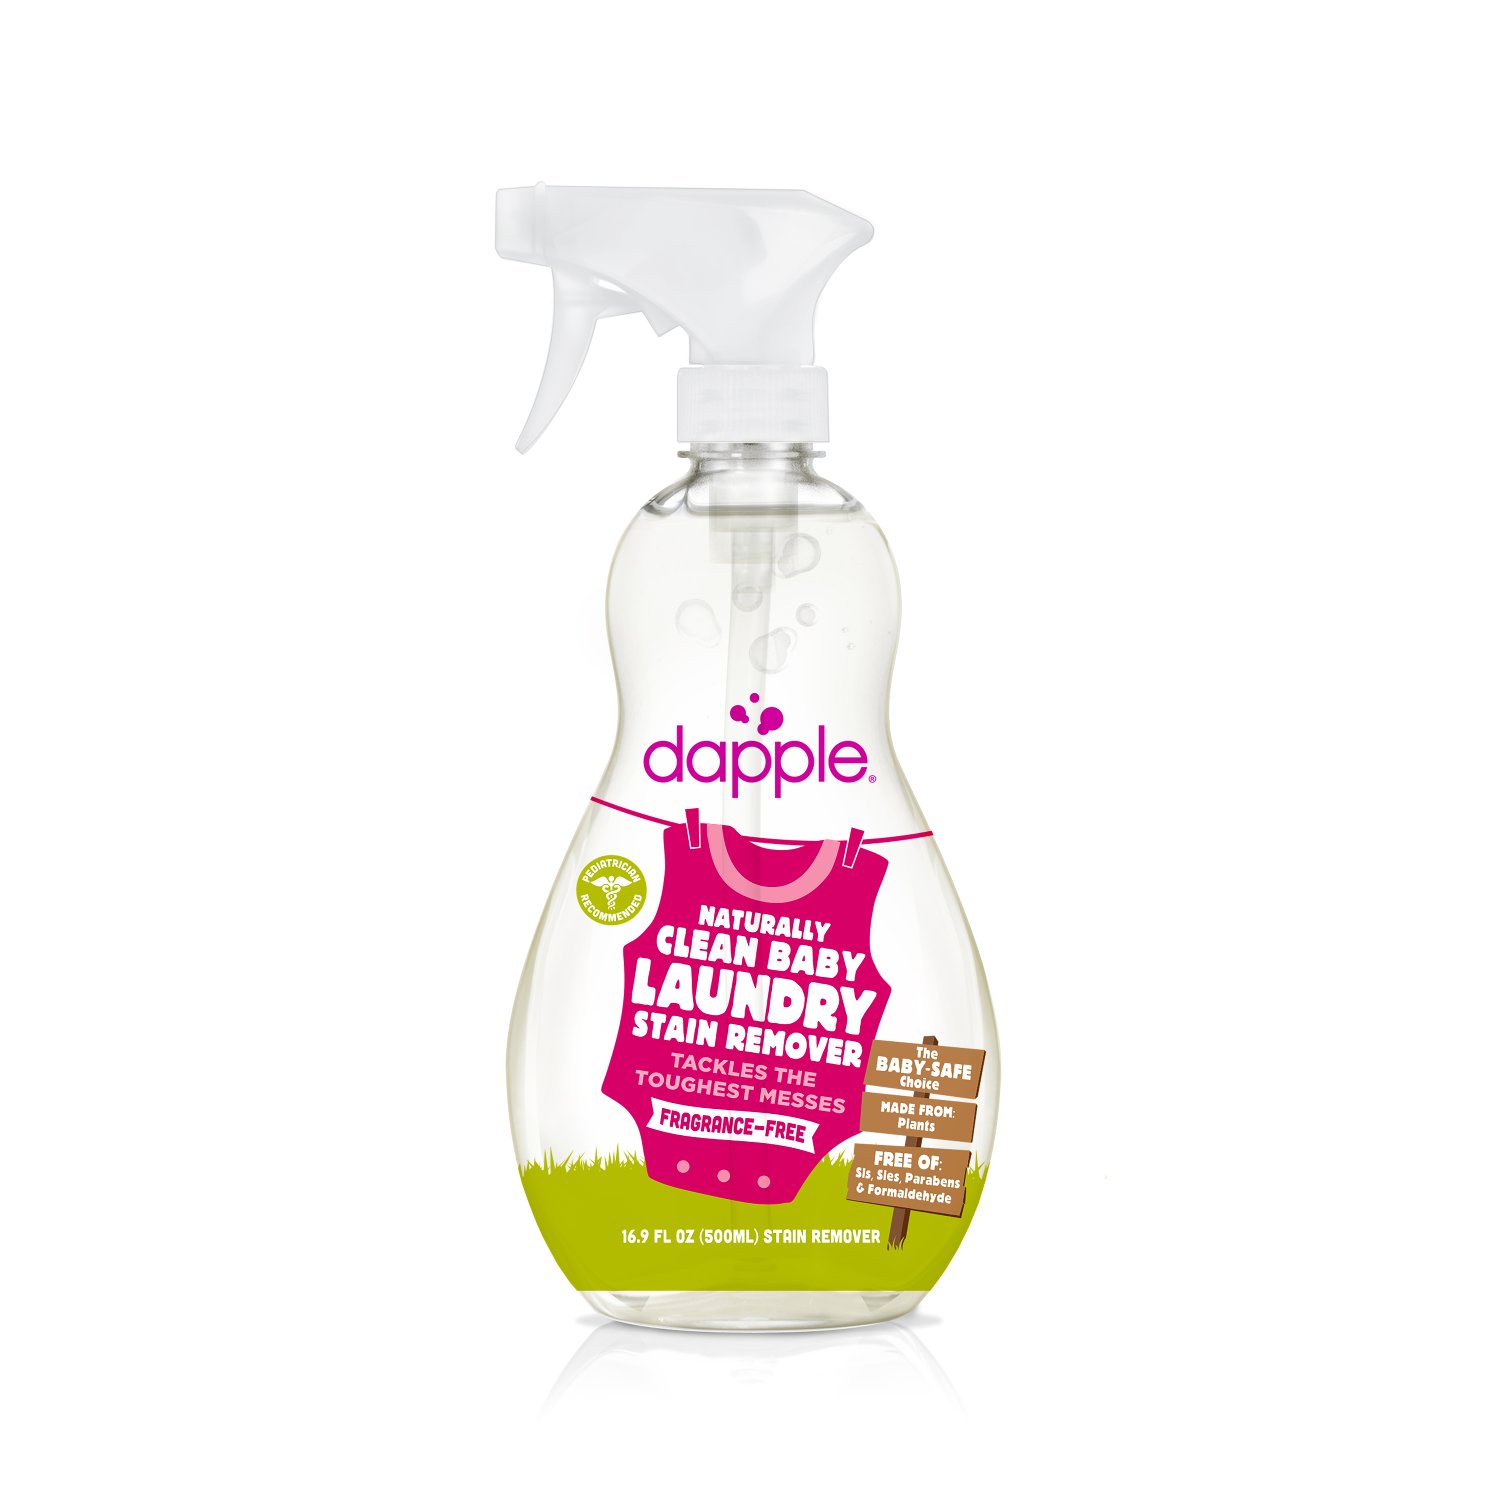 Quirks Marketing Philippines - Dapple - Naturally Clean Baby Laundry Spray